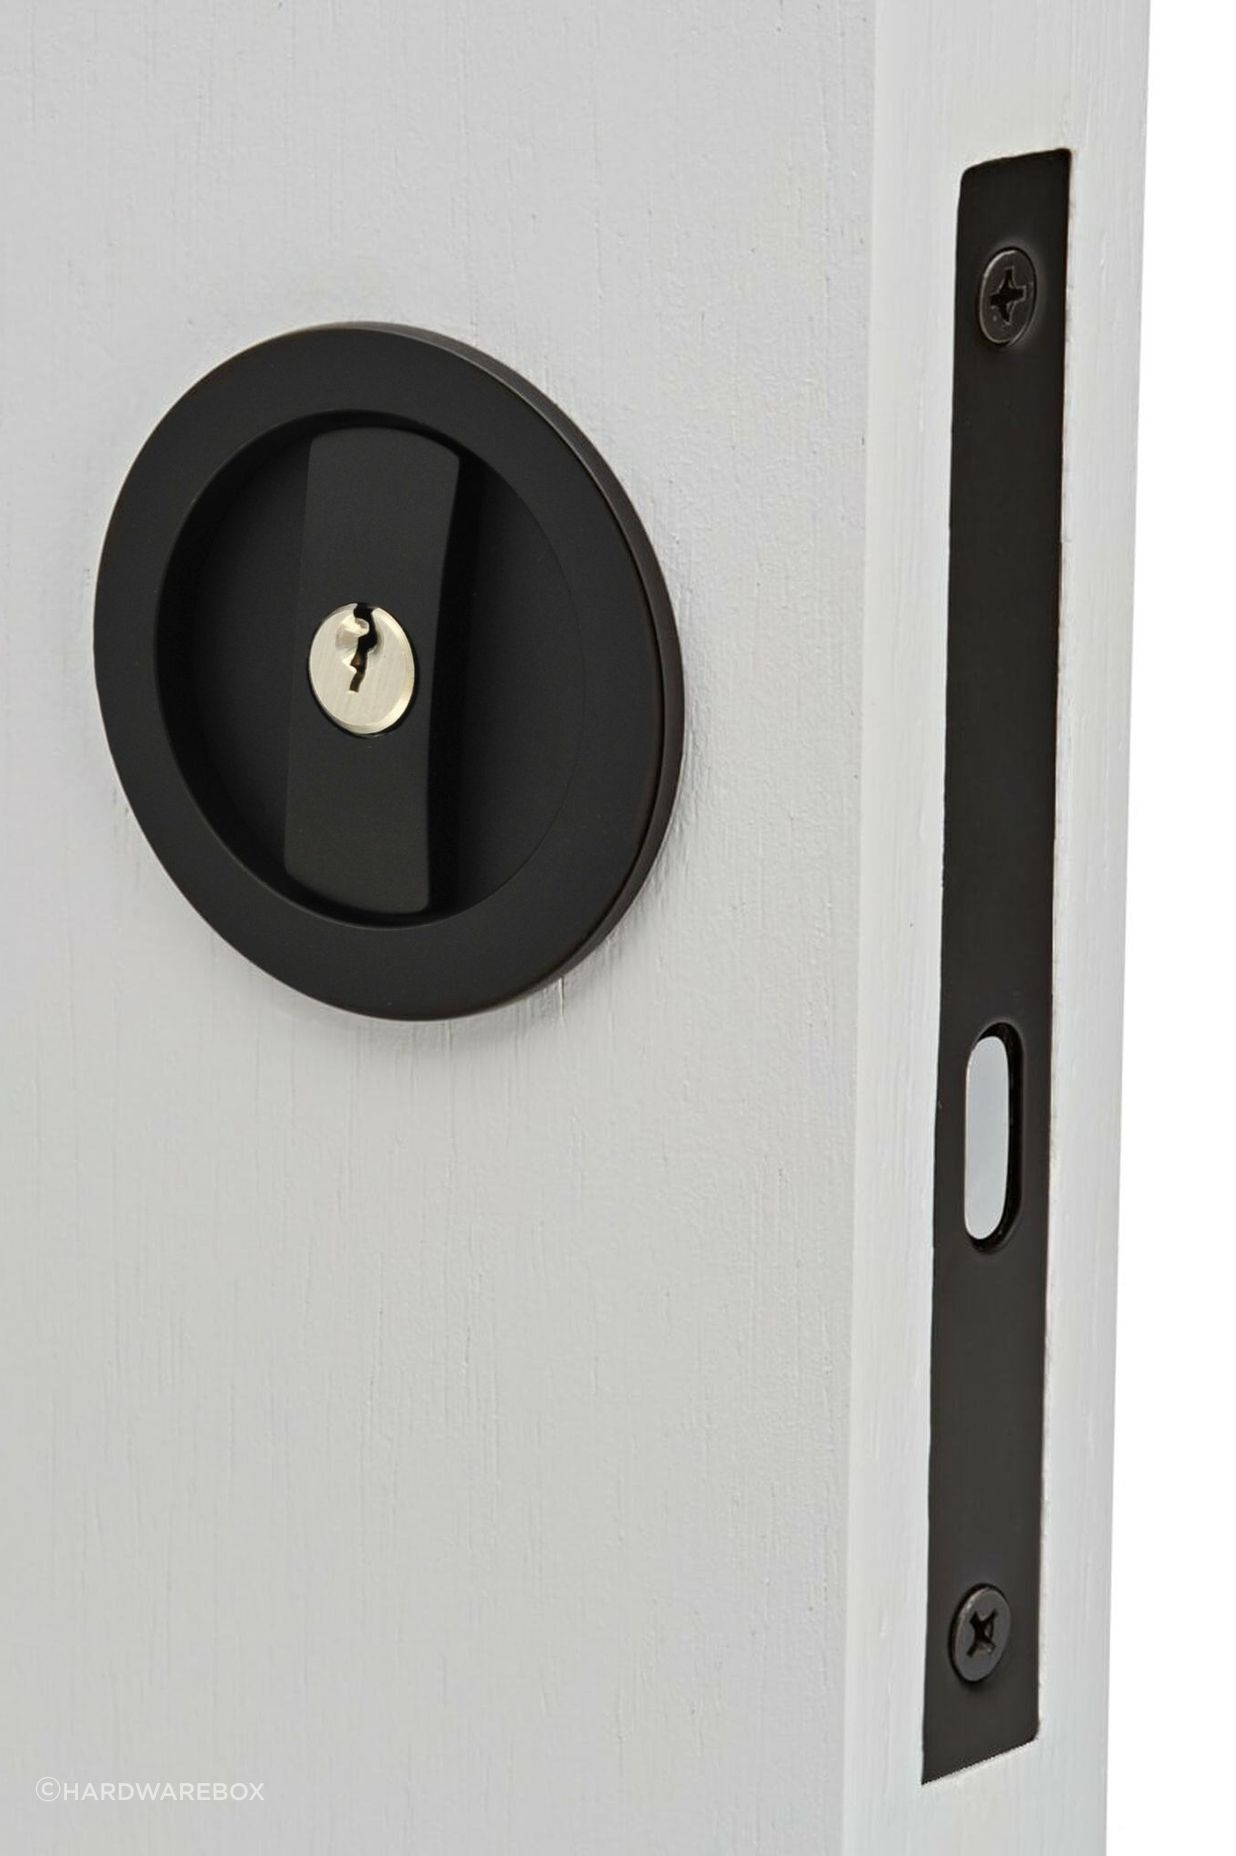 Mortise locks are well suited to internal areas such as bathrooms